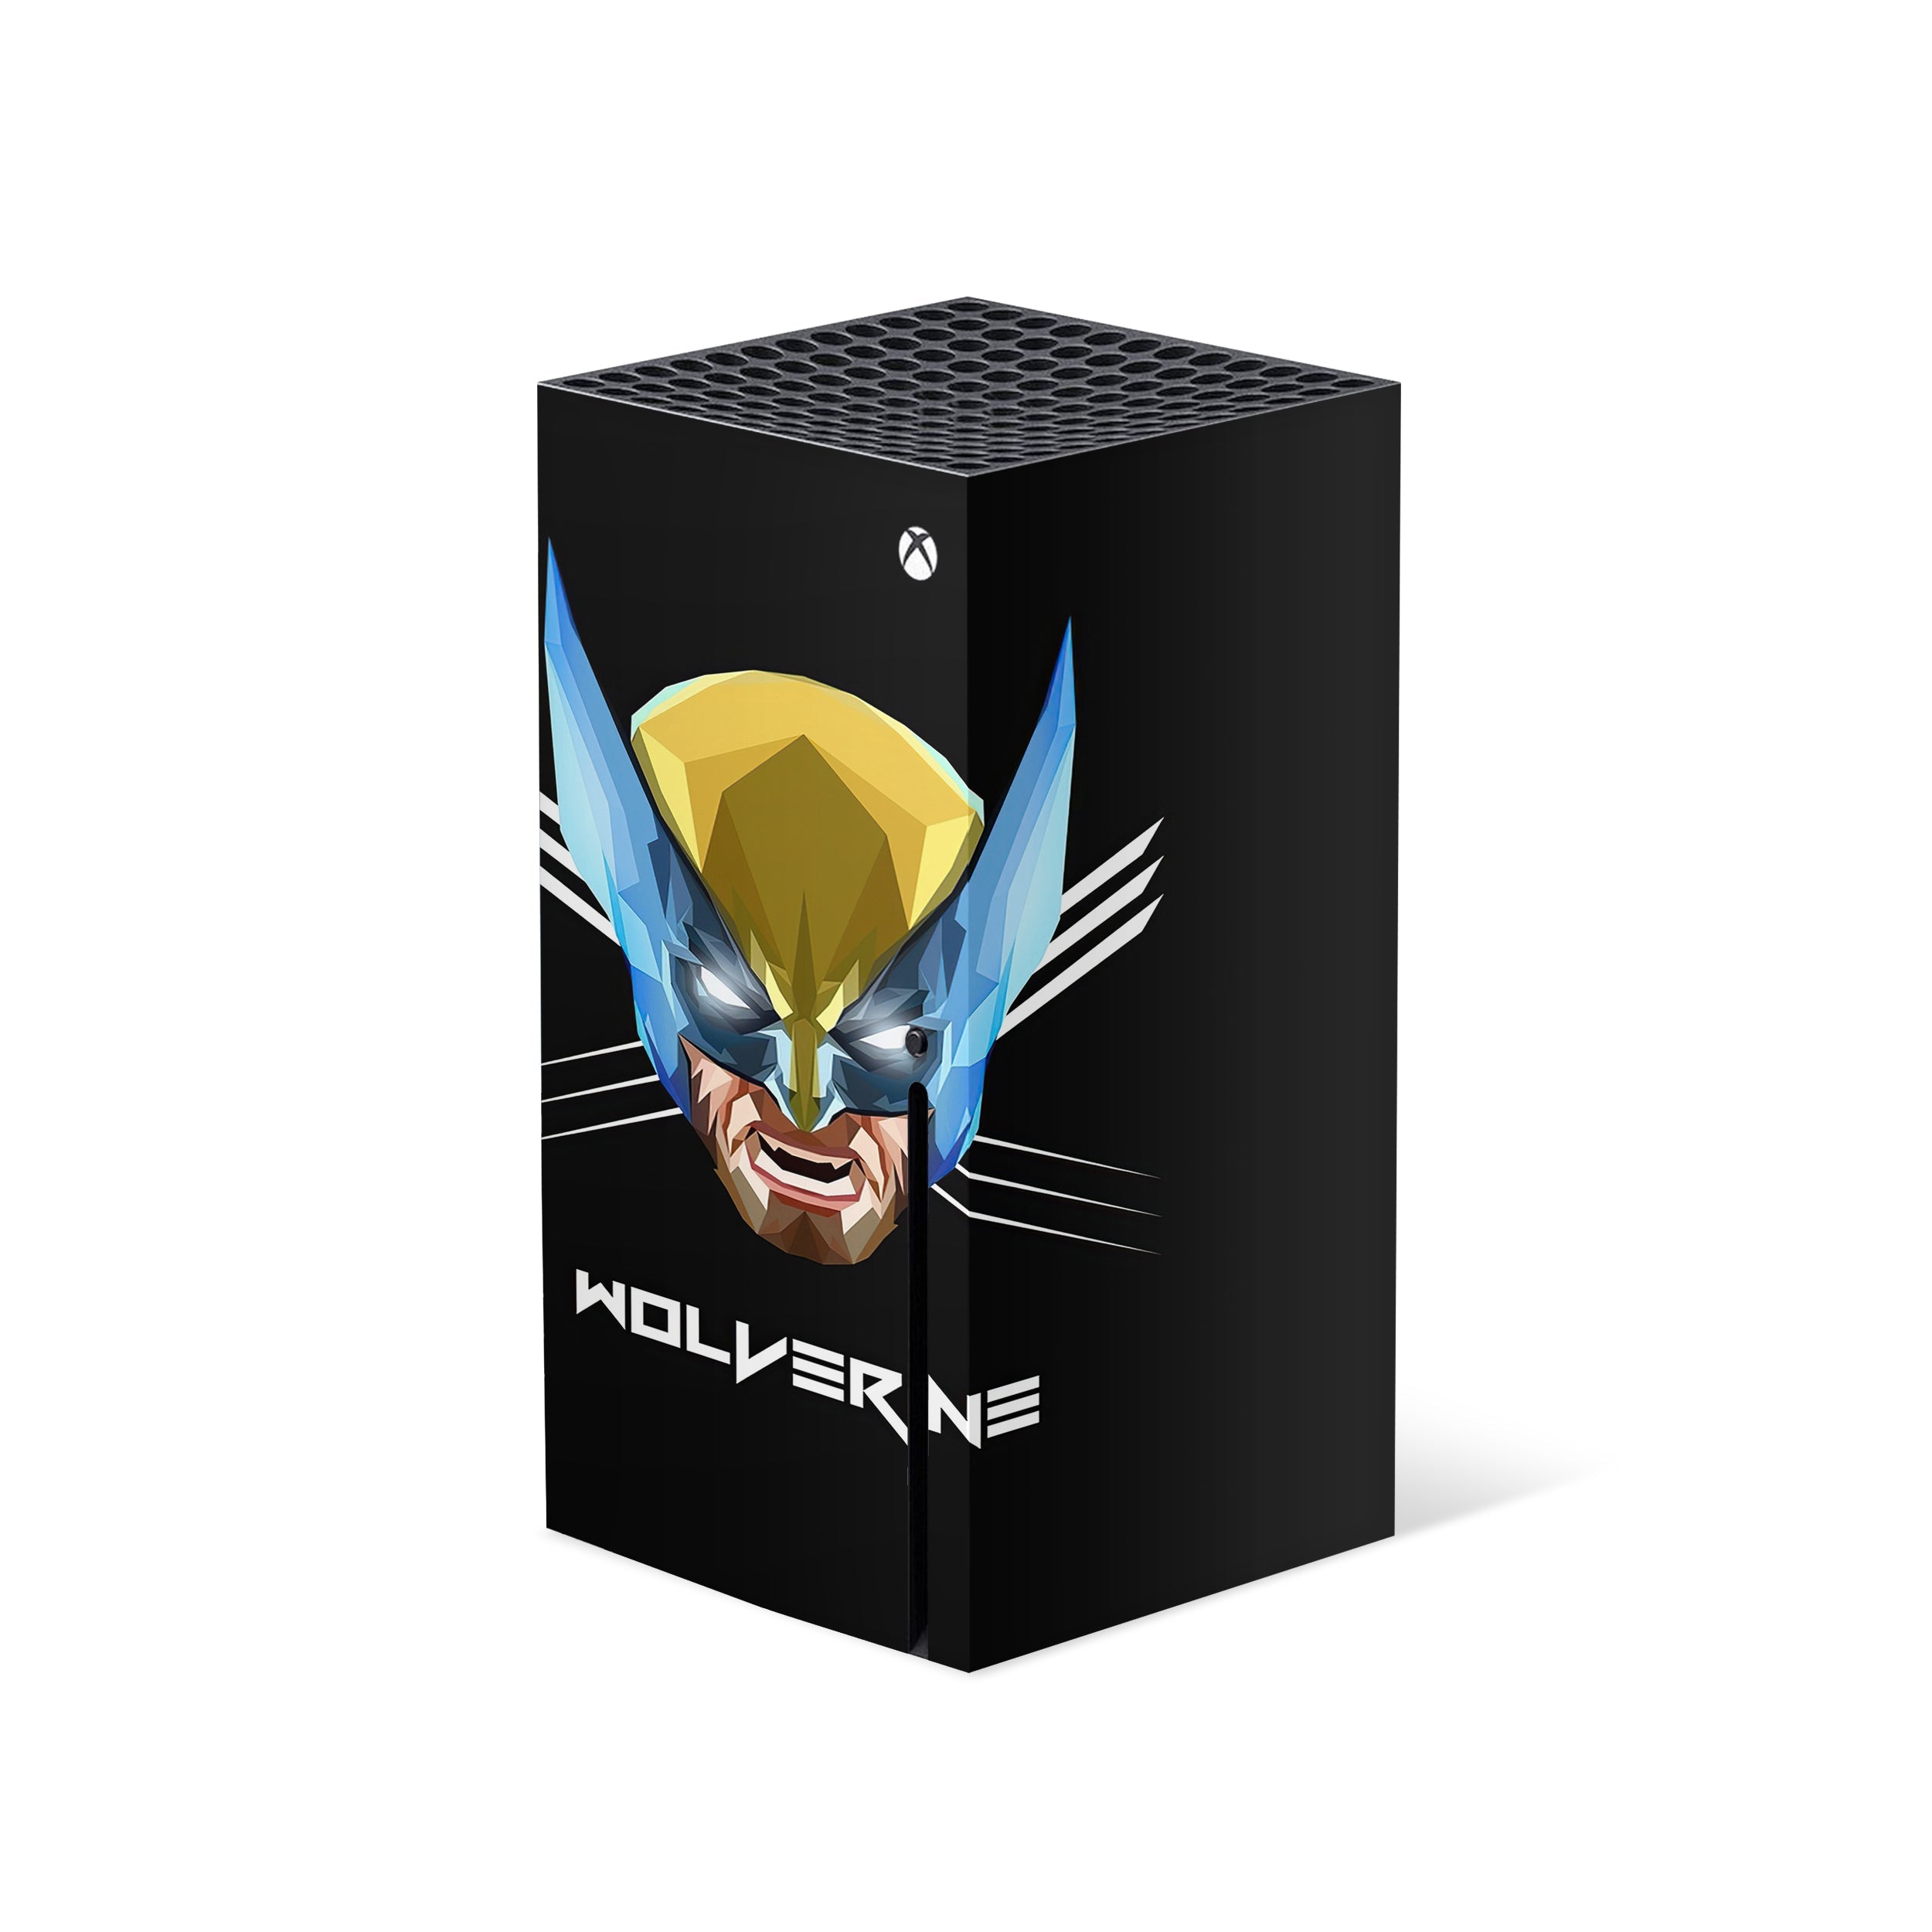 A video game skin featuring a Marvel Comics X Men Wolverine design for the Xbox Series X.